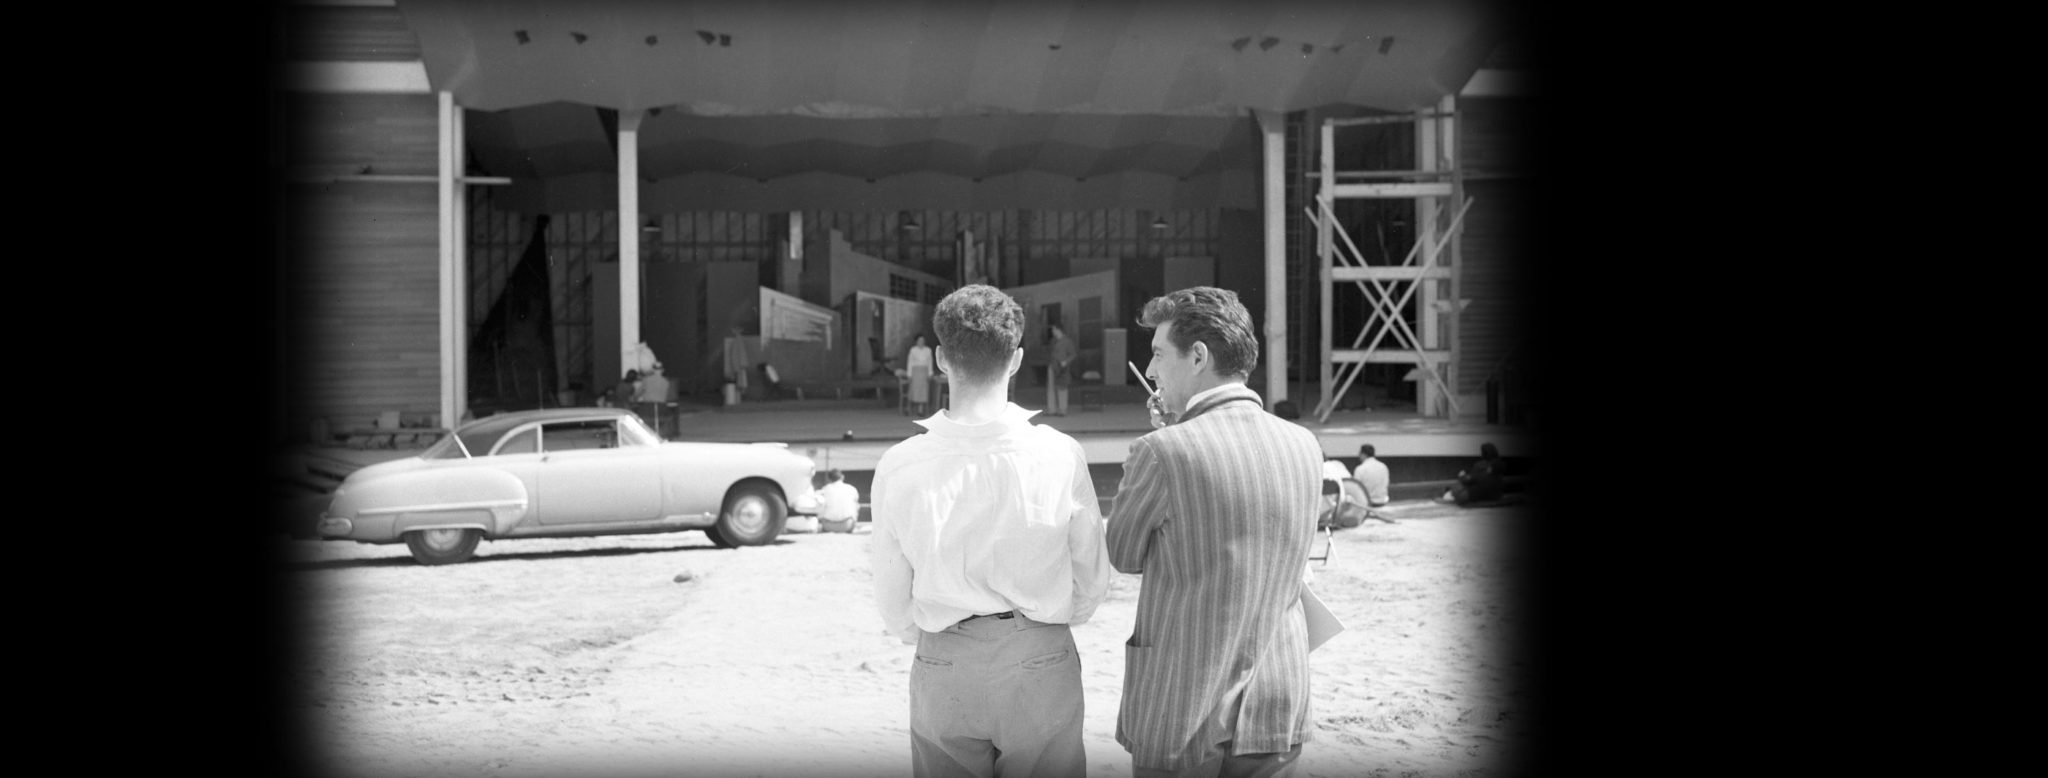 Leonard Bernstein (right) in front of the stage set for "Trouble in Tahiti," 1952. (Courtesy of the Robert D. Farber University Archives & Special Collections Department, Brandeis University.)